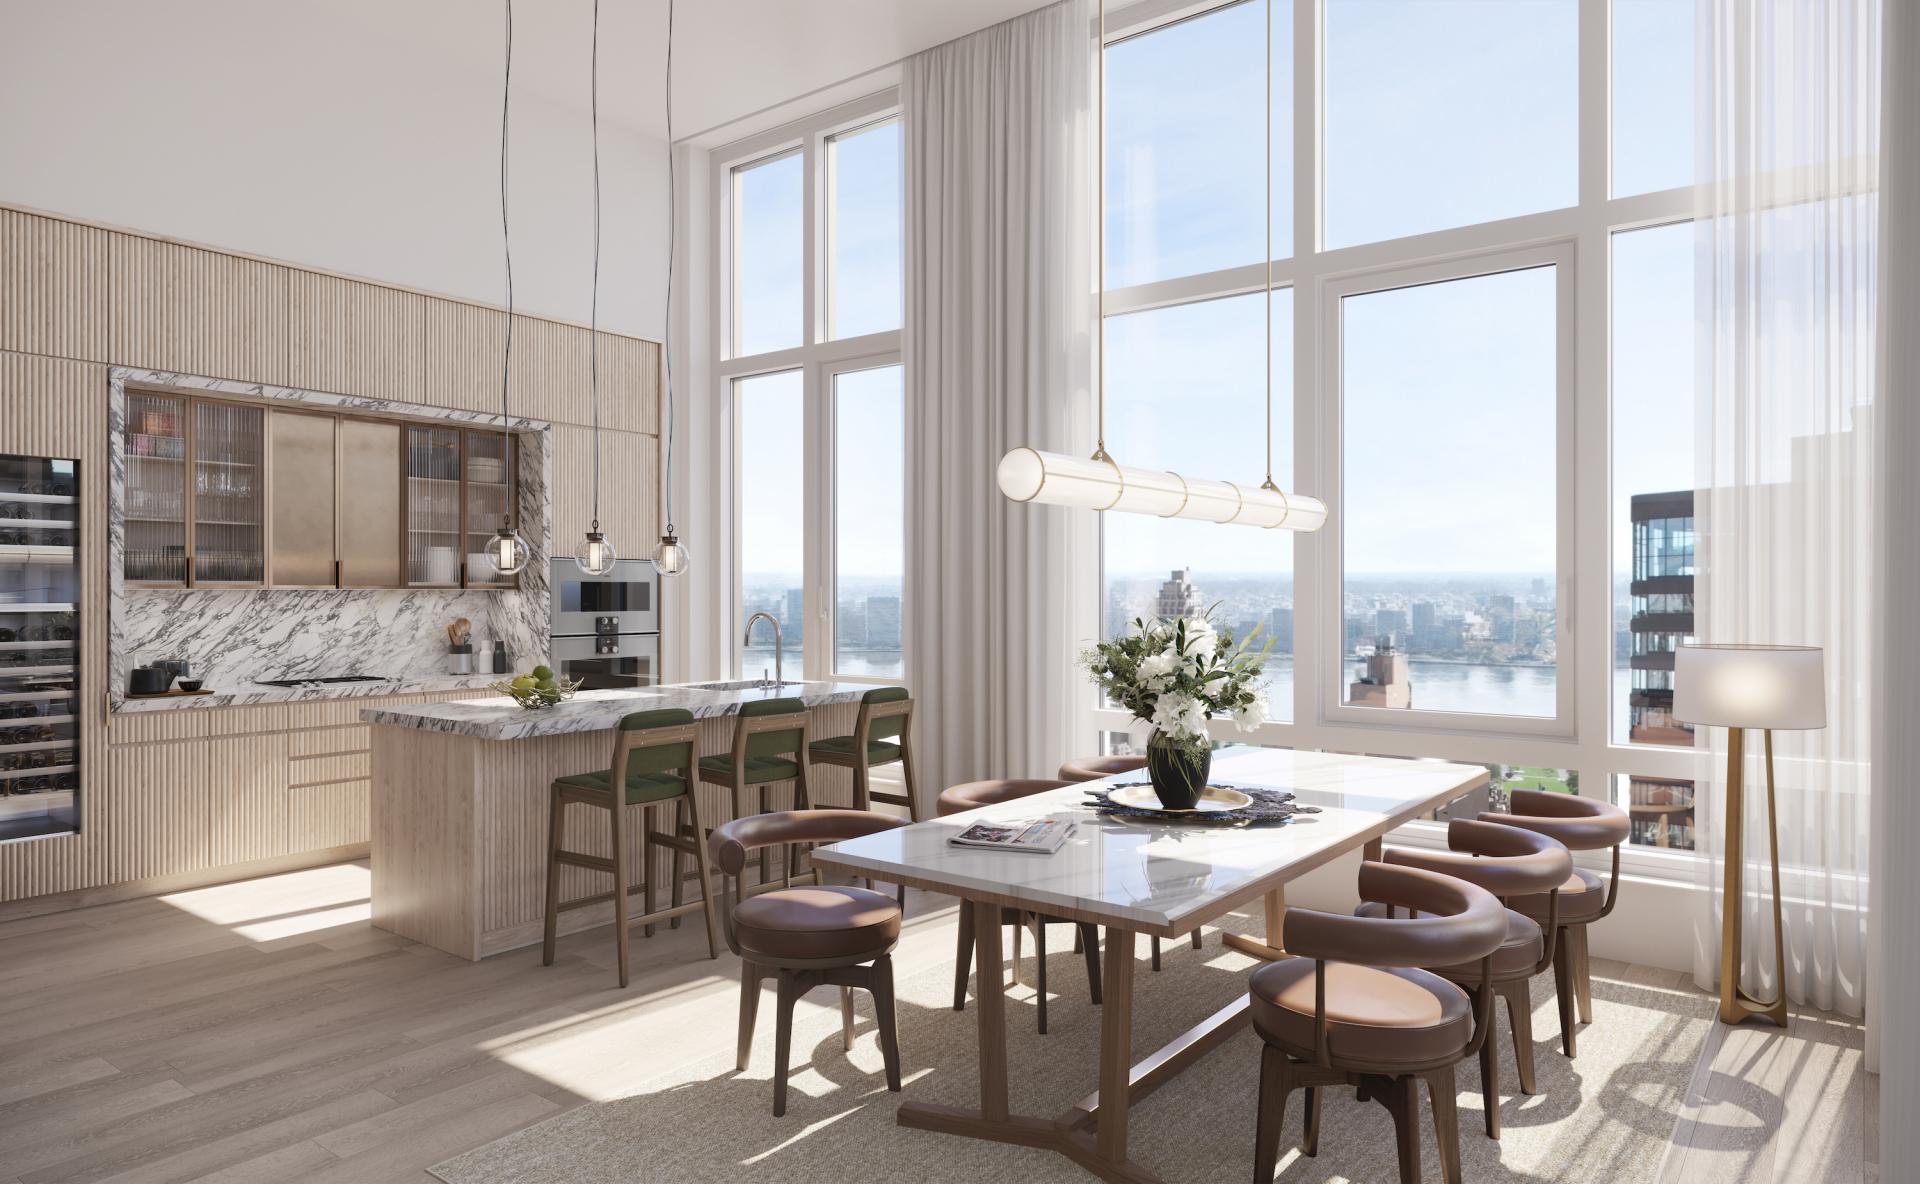 Monogram New York by Shanghai Design Firm Nears Completion with US$882,000 Homes